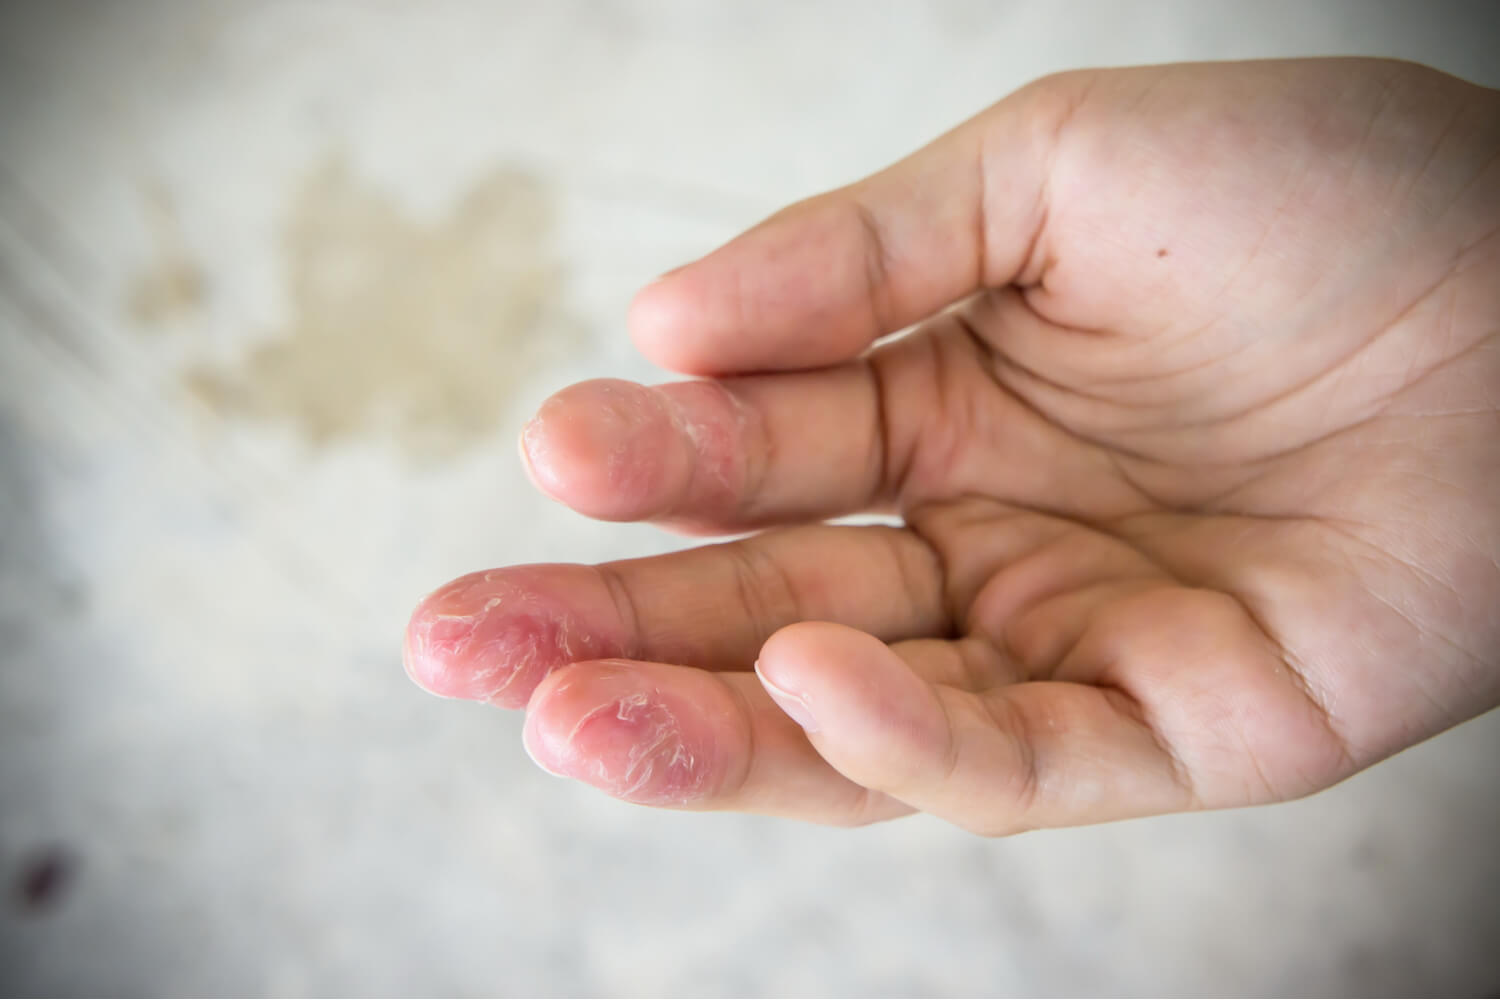 Contact dermatitis causes itching and peeling of skin after repeated contact with an irritant